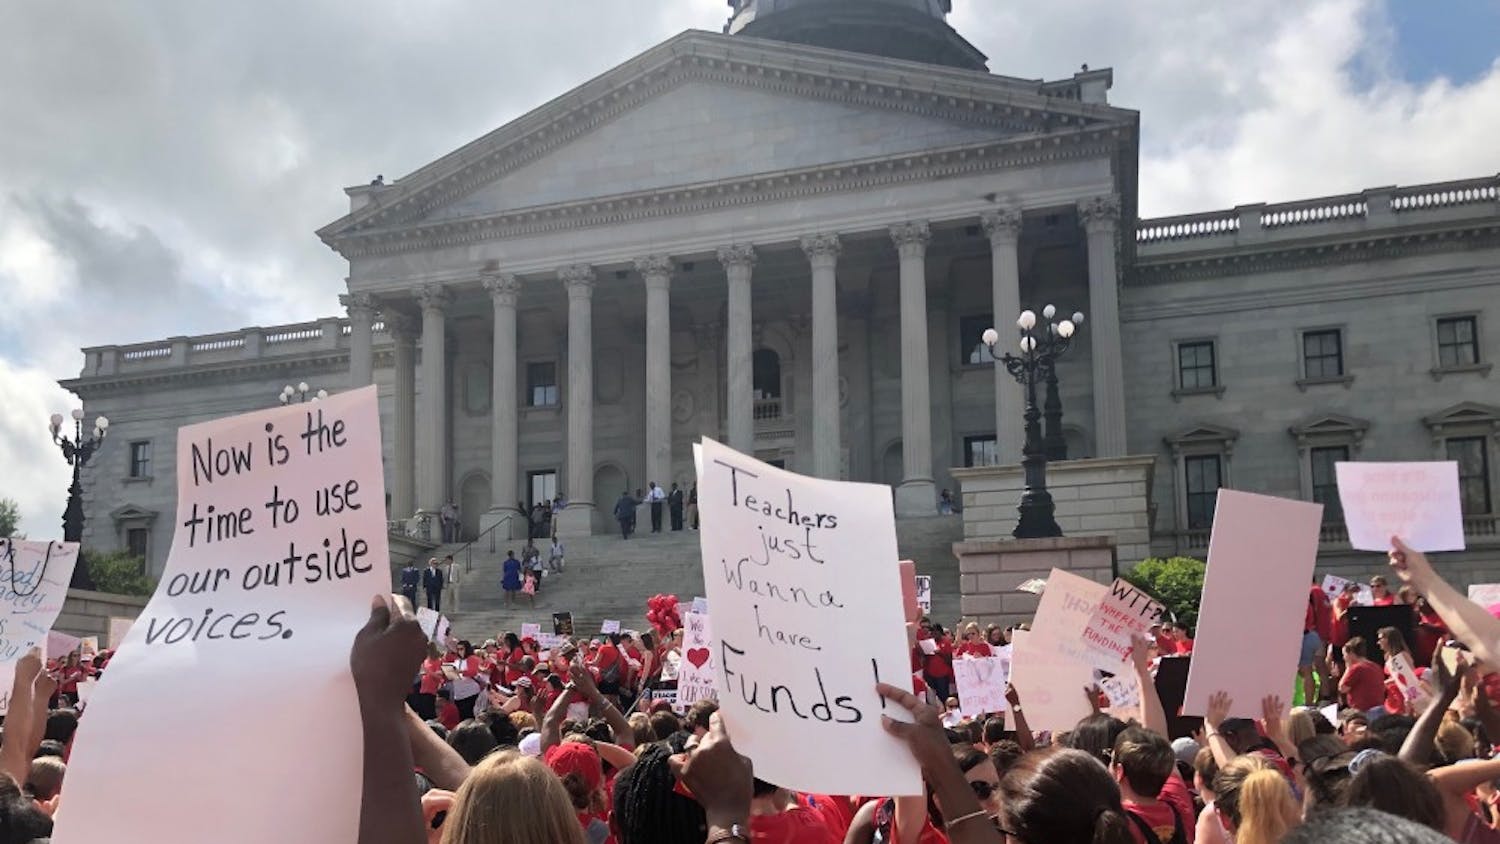 More than 10,000 people marched on South Carolina State House grounds to protest the state education system on May 1, 2019. Teachers called for higher pay, smaller classes and mental health counseling for students.